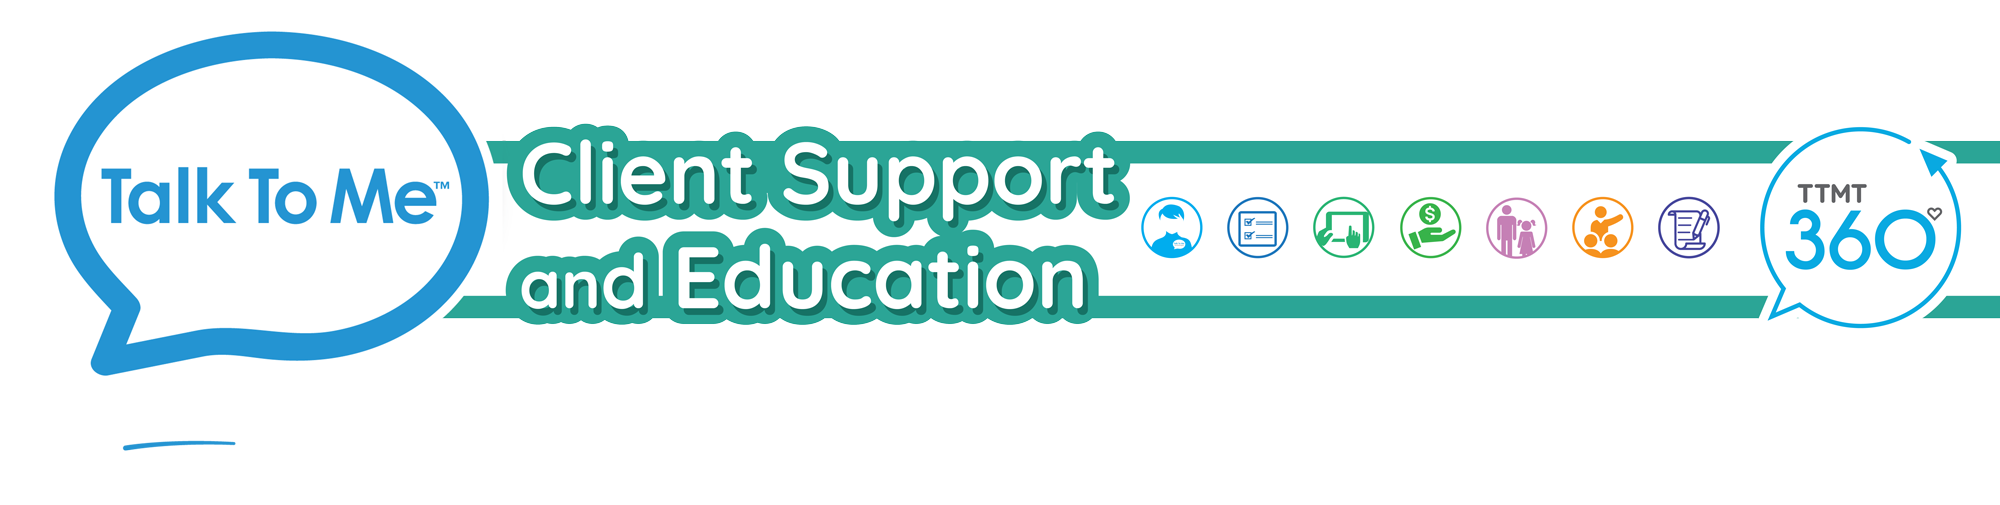 client support and education header